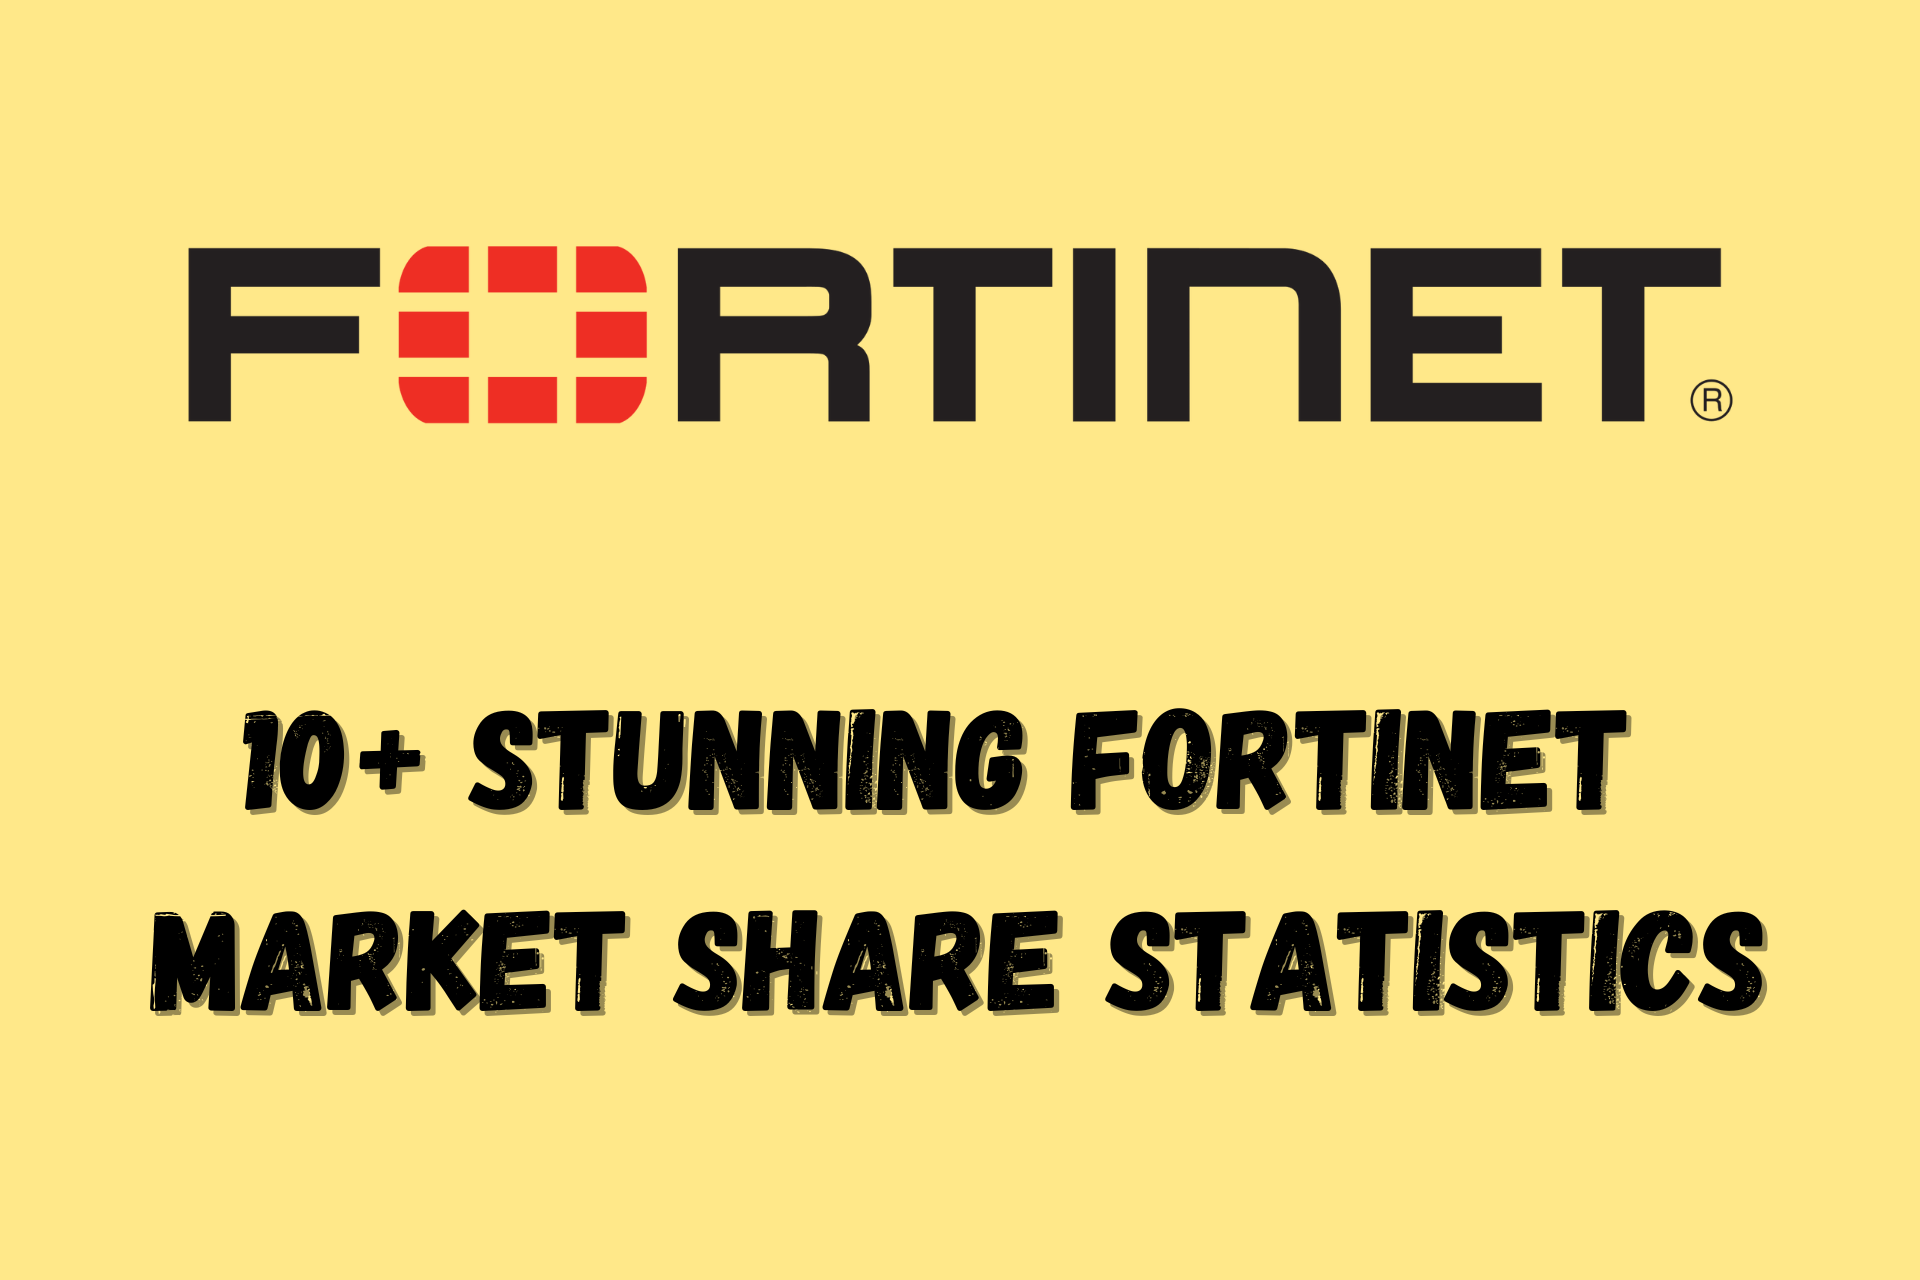 fortinet market share